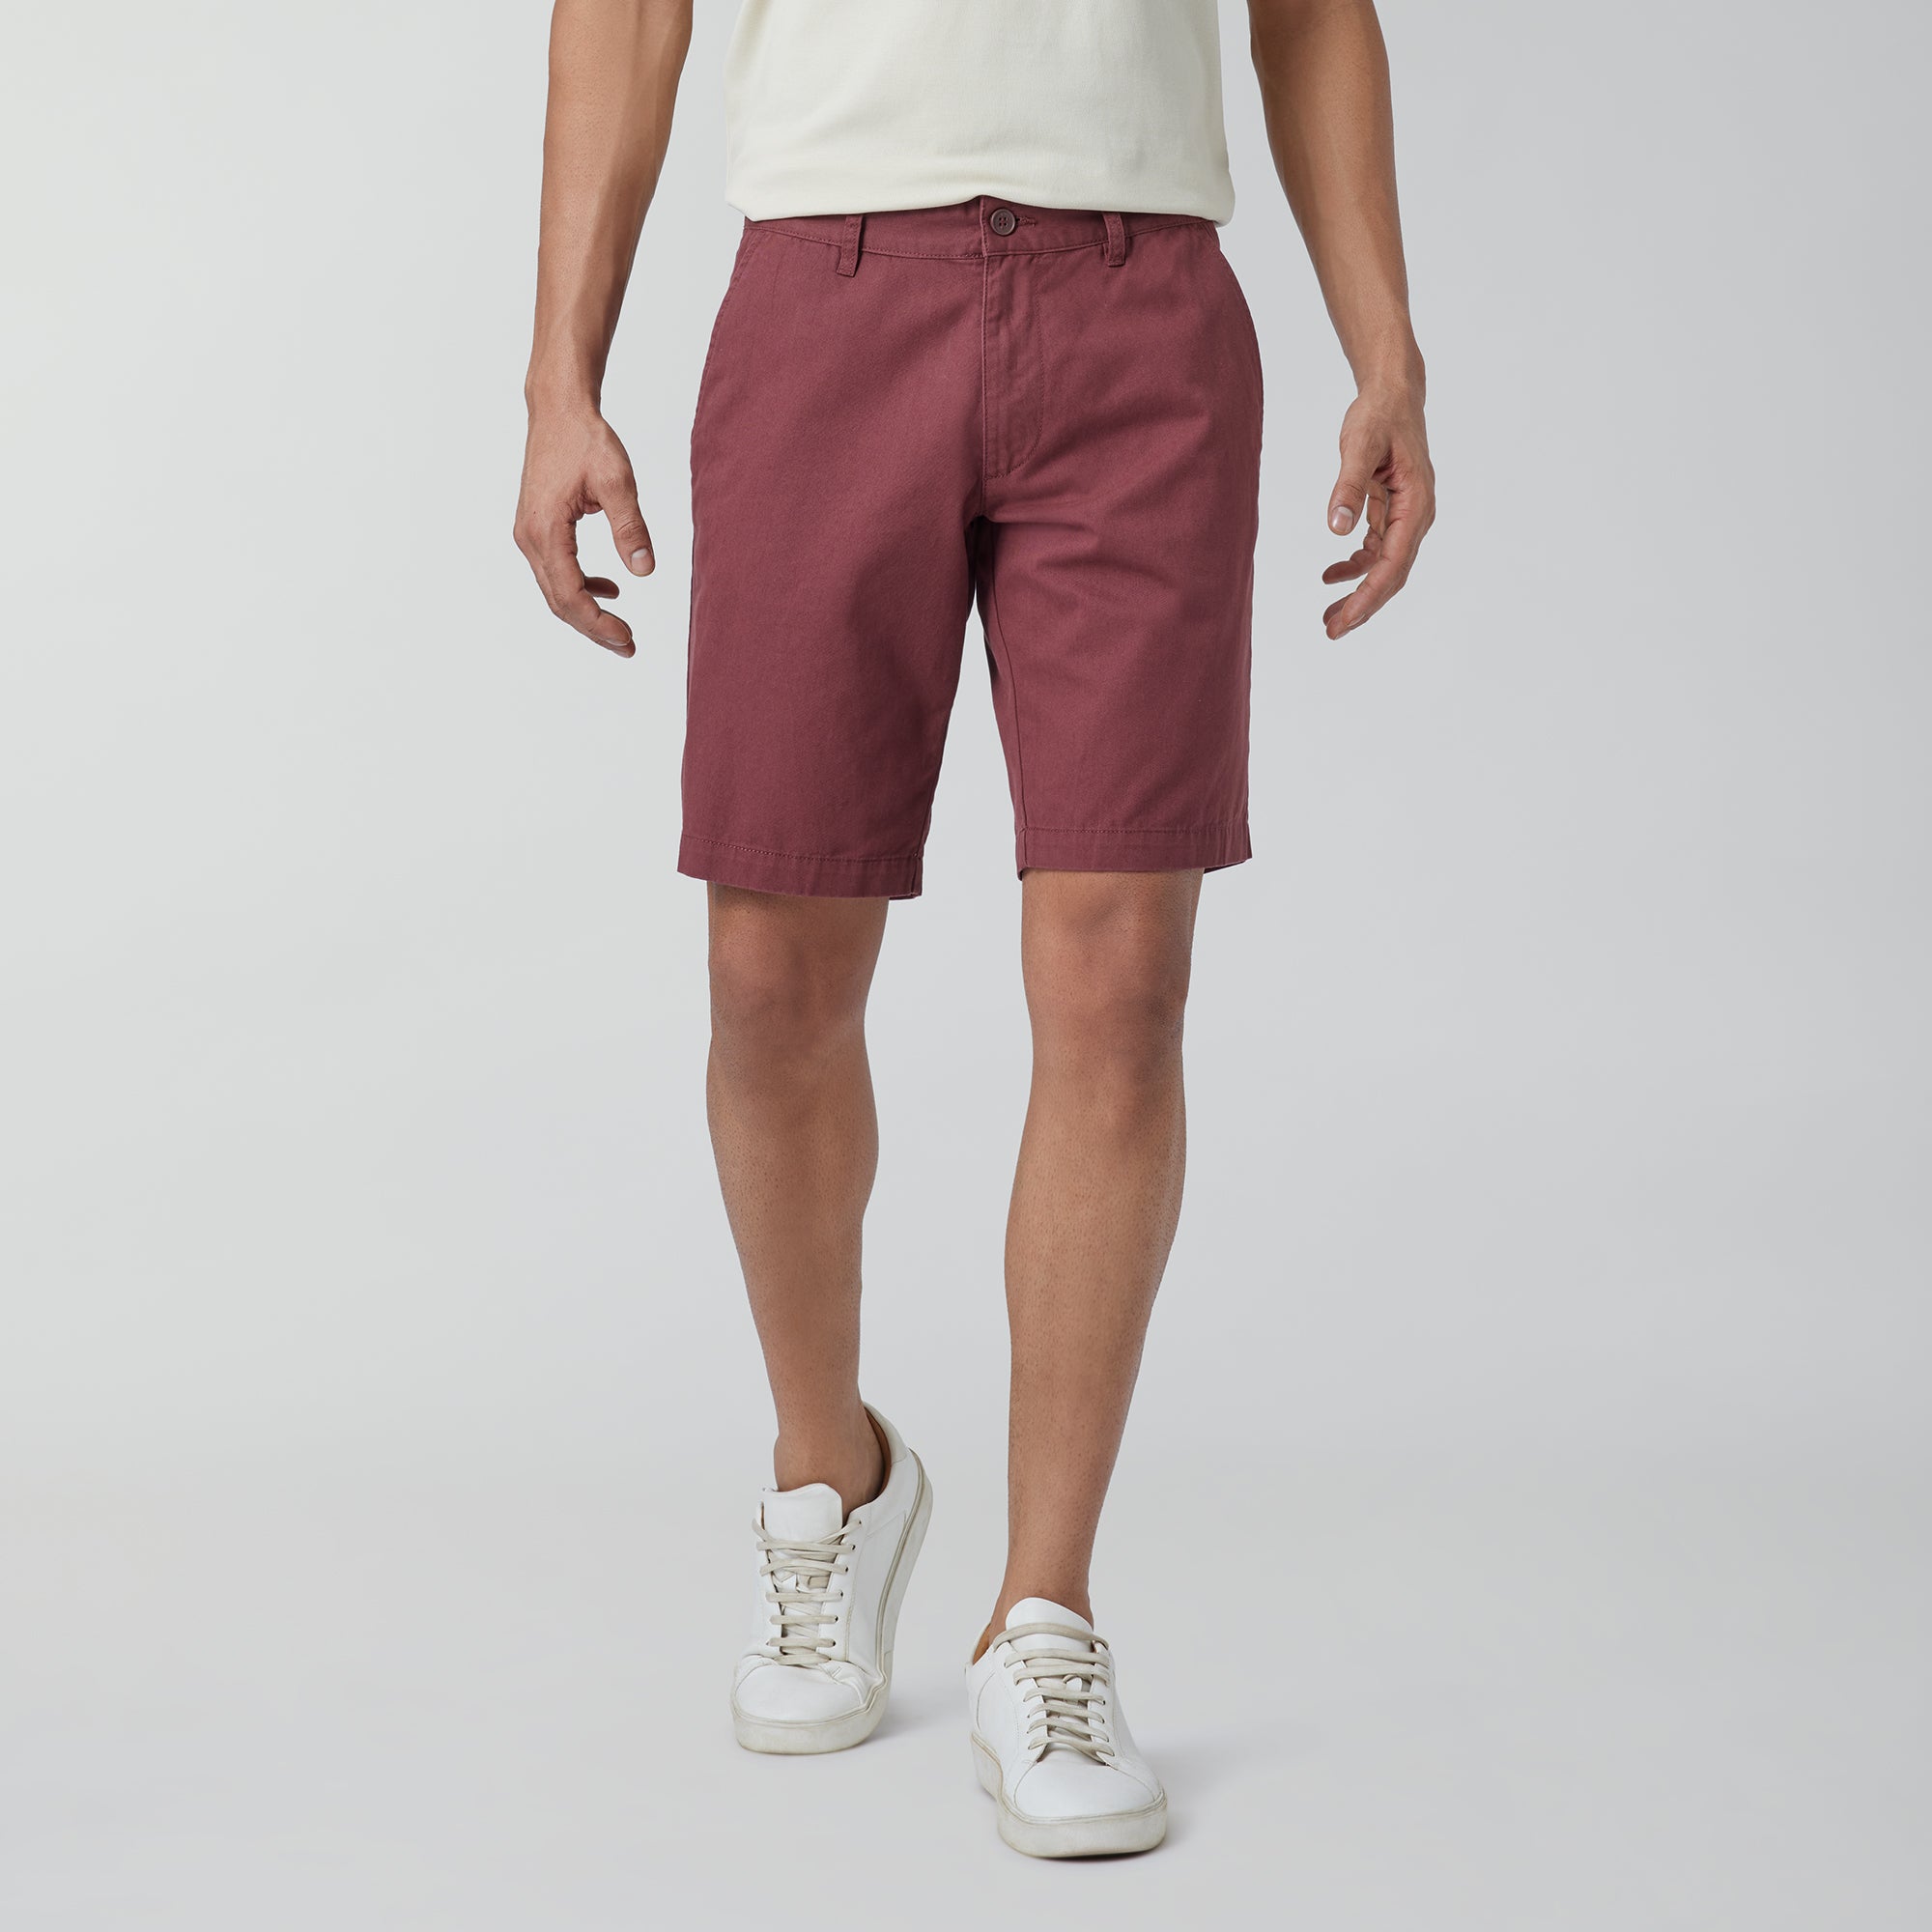 Element Cotton Chinos Shorts For Men Brick Red - XYXX Crew